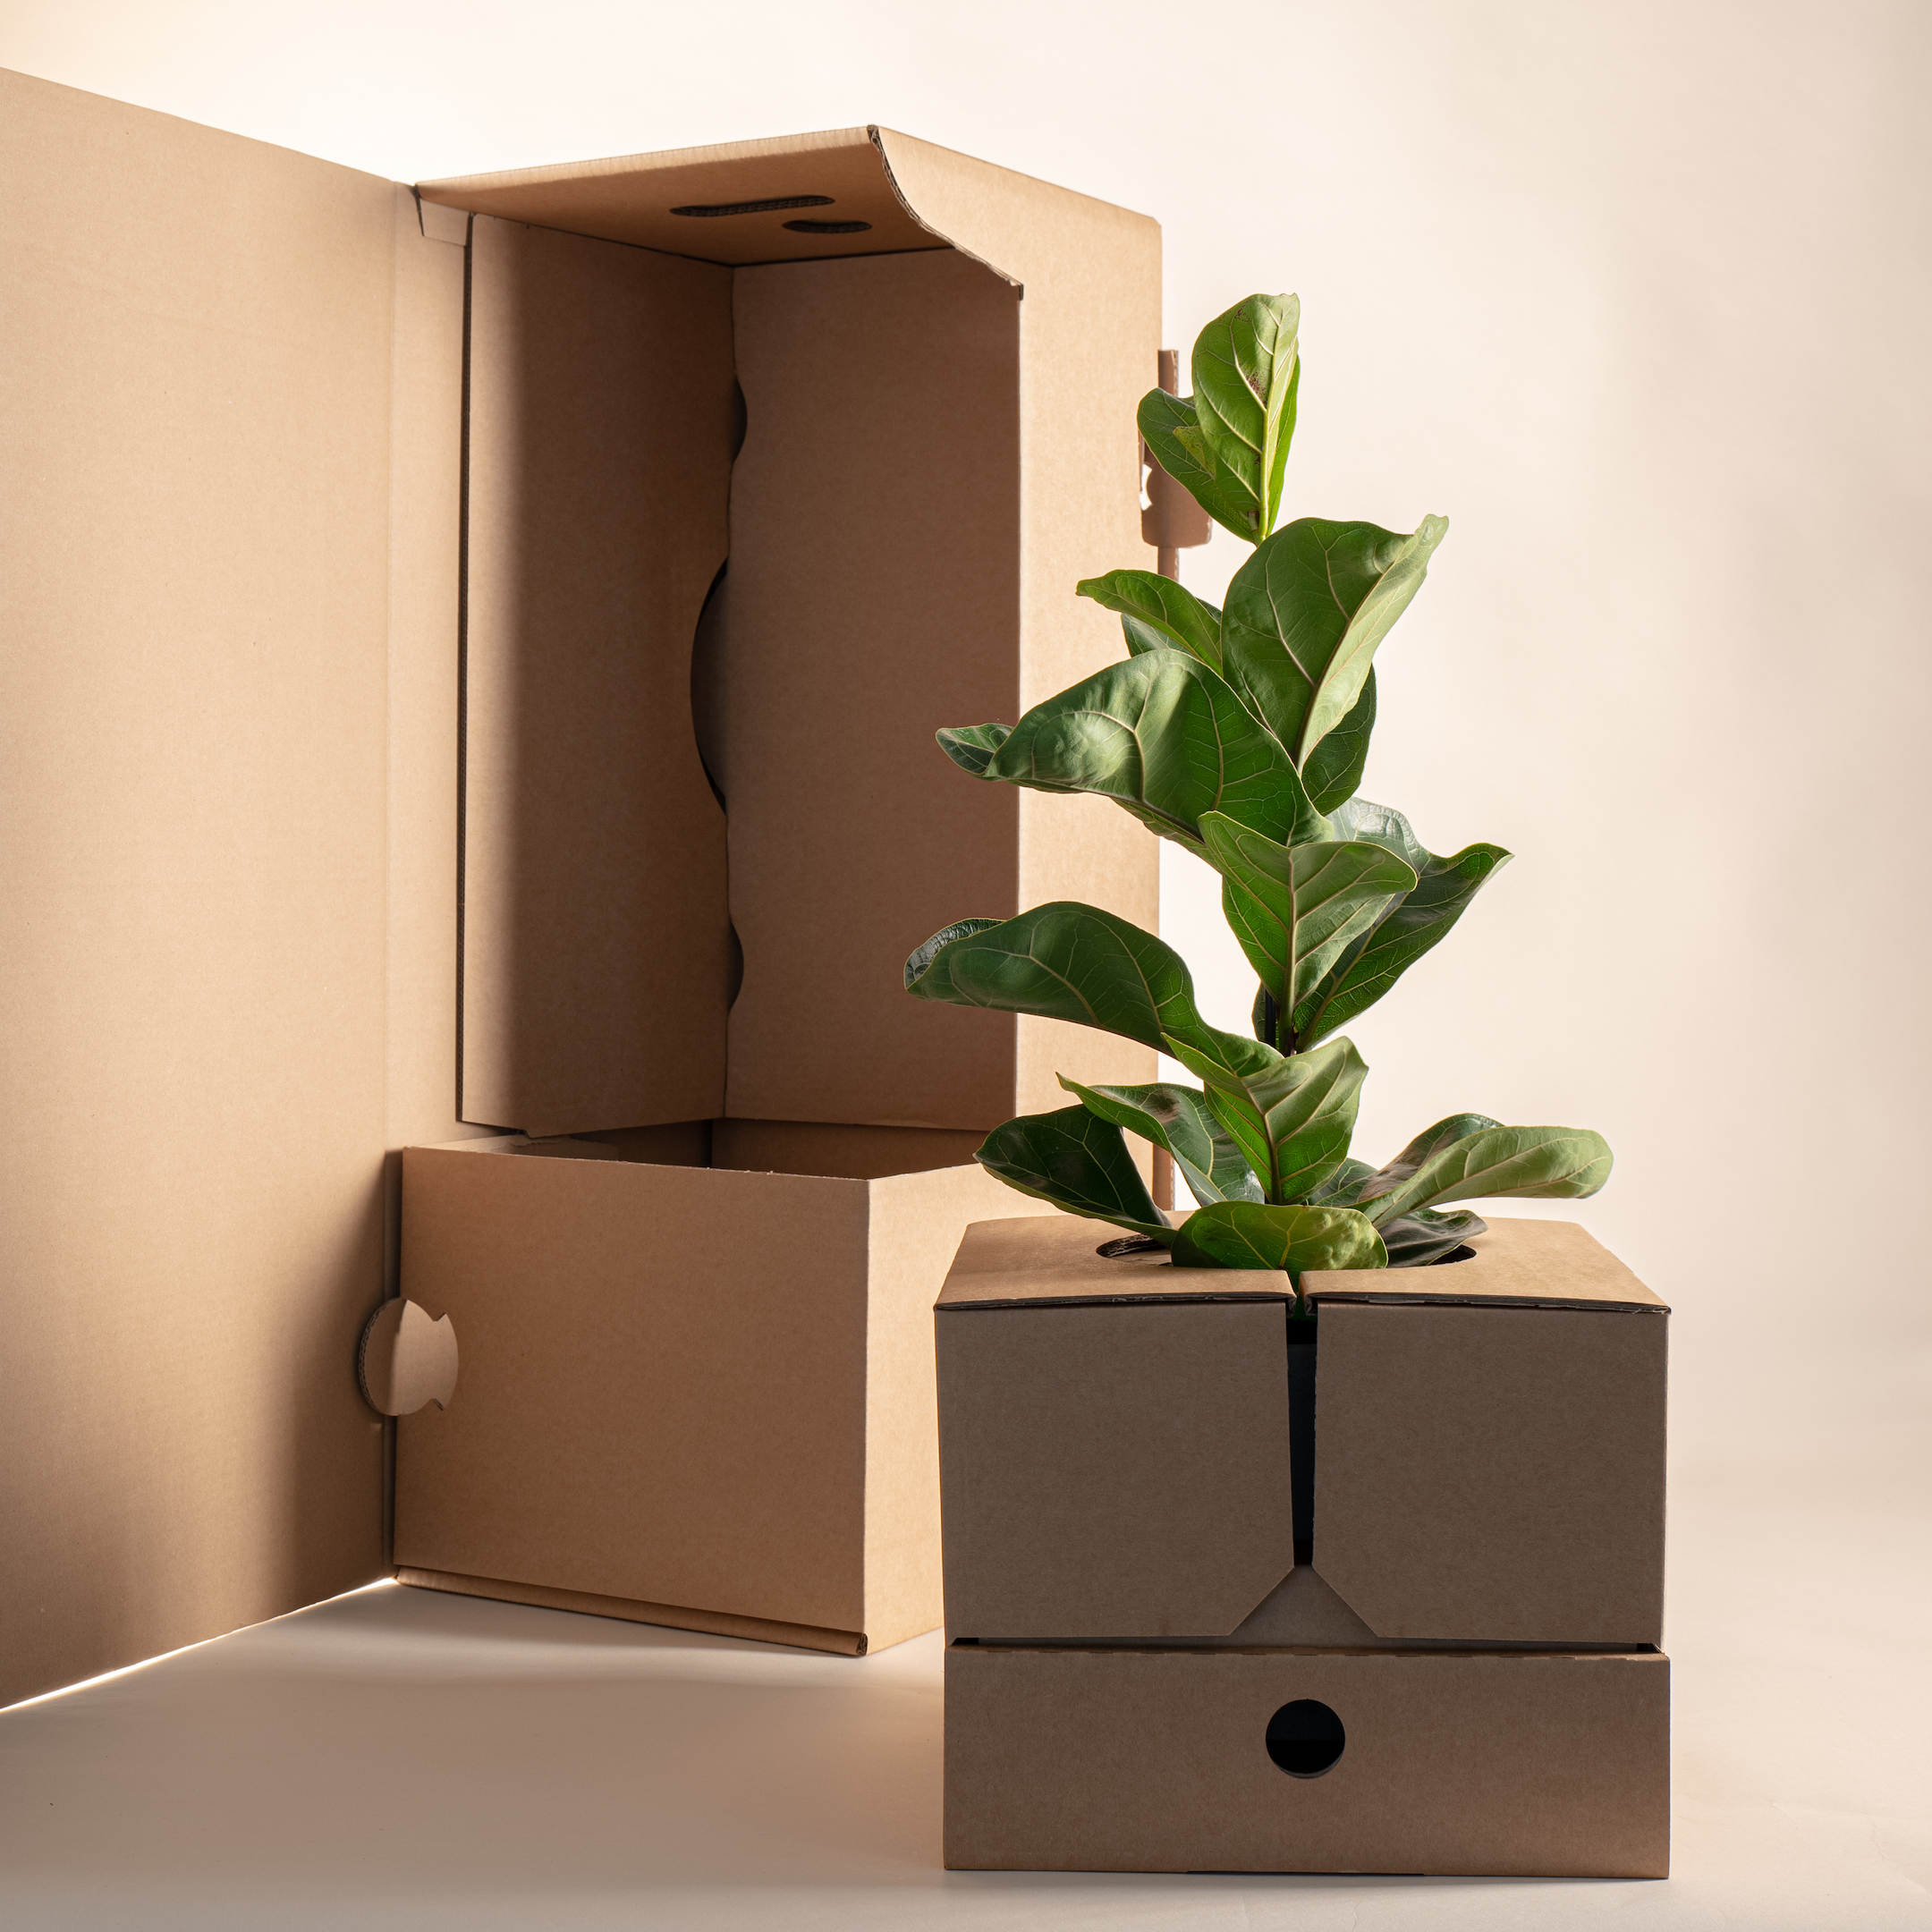 https://www.modelgroup.com/content/dam/modelgroup/global/inspiration-hub/mary-and-plants/Verpackung%20S_M%20Unboxing%201_1%206.jpg